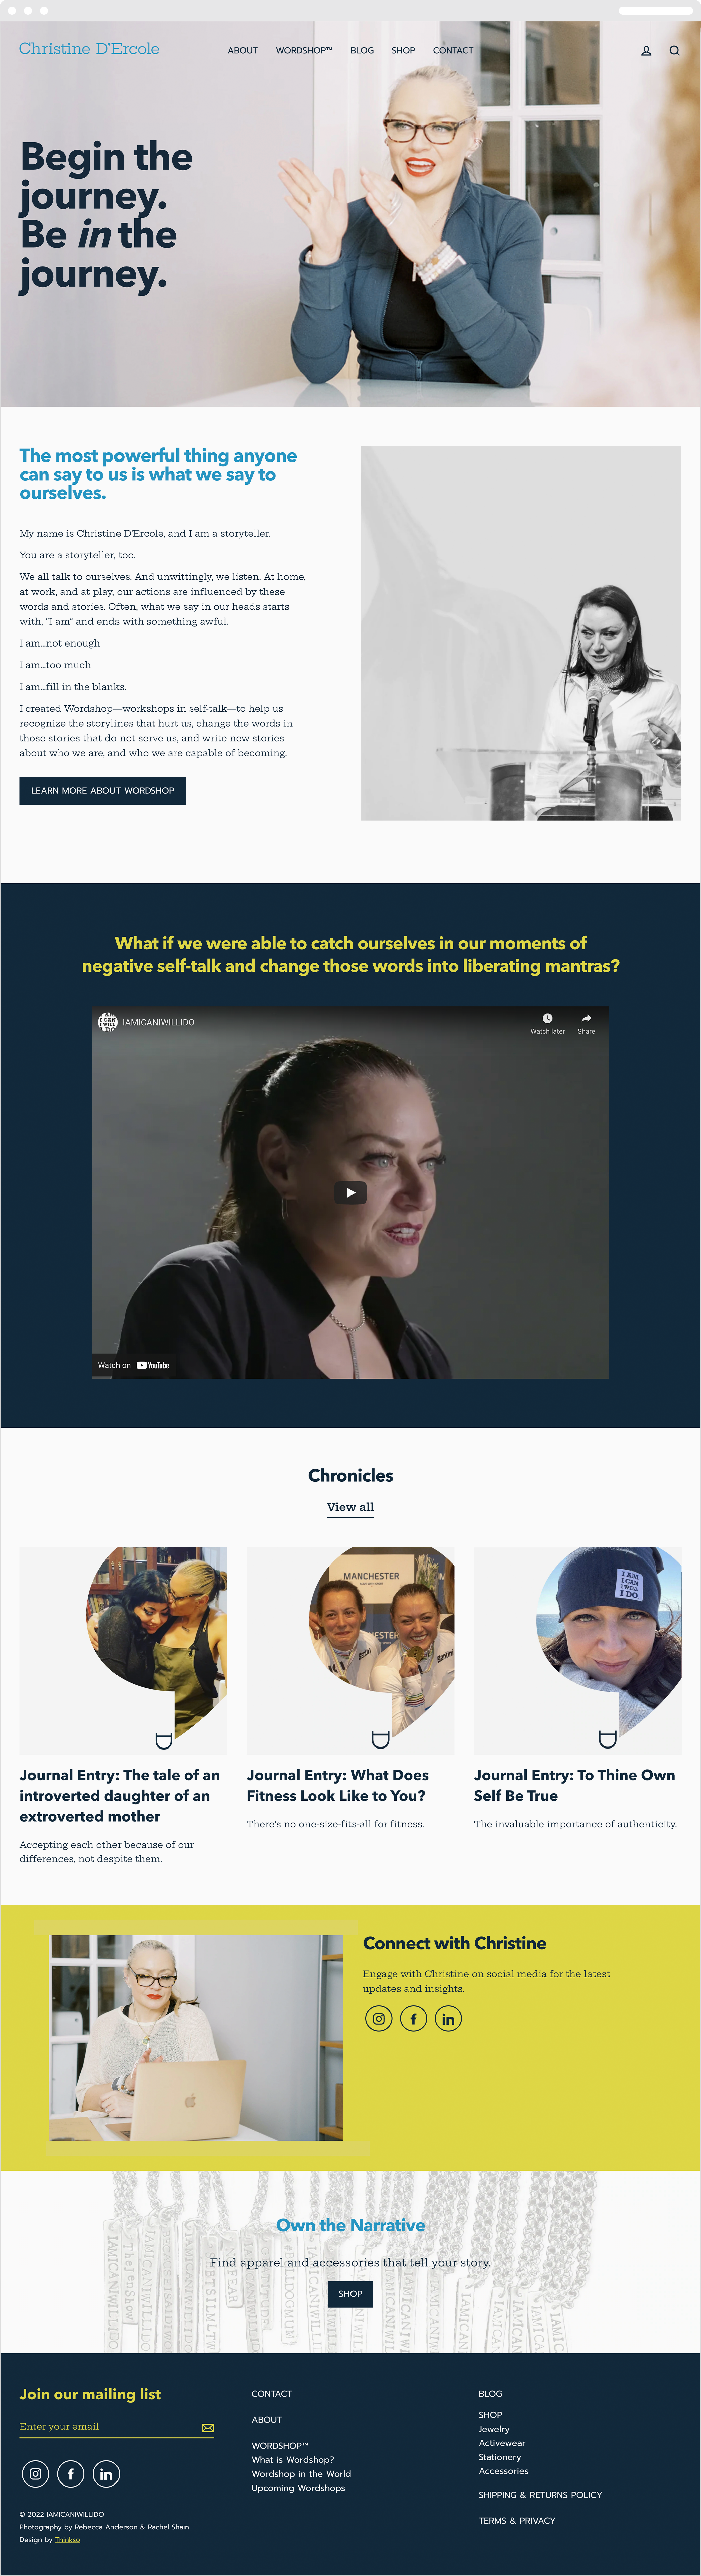 Screenshots of a website homepage with various images of Christine D’Ercole and colorful text.